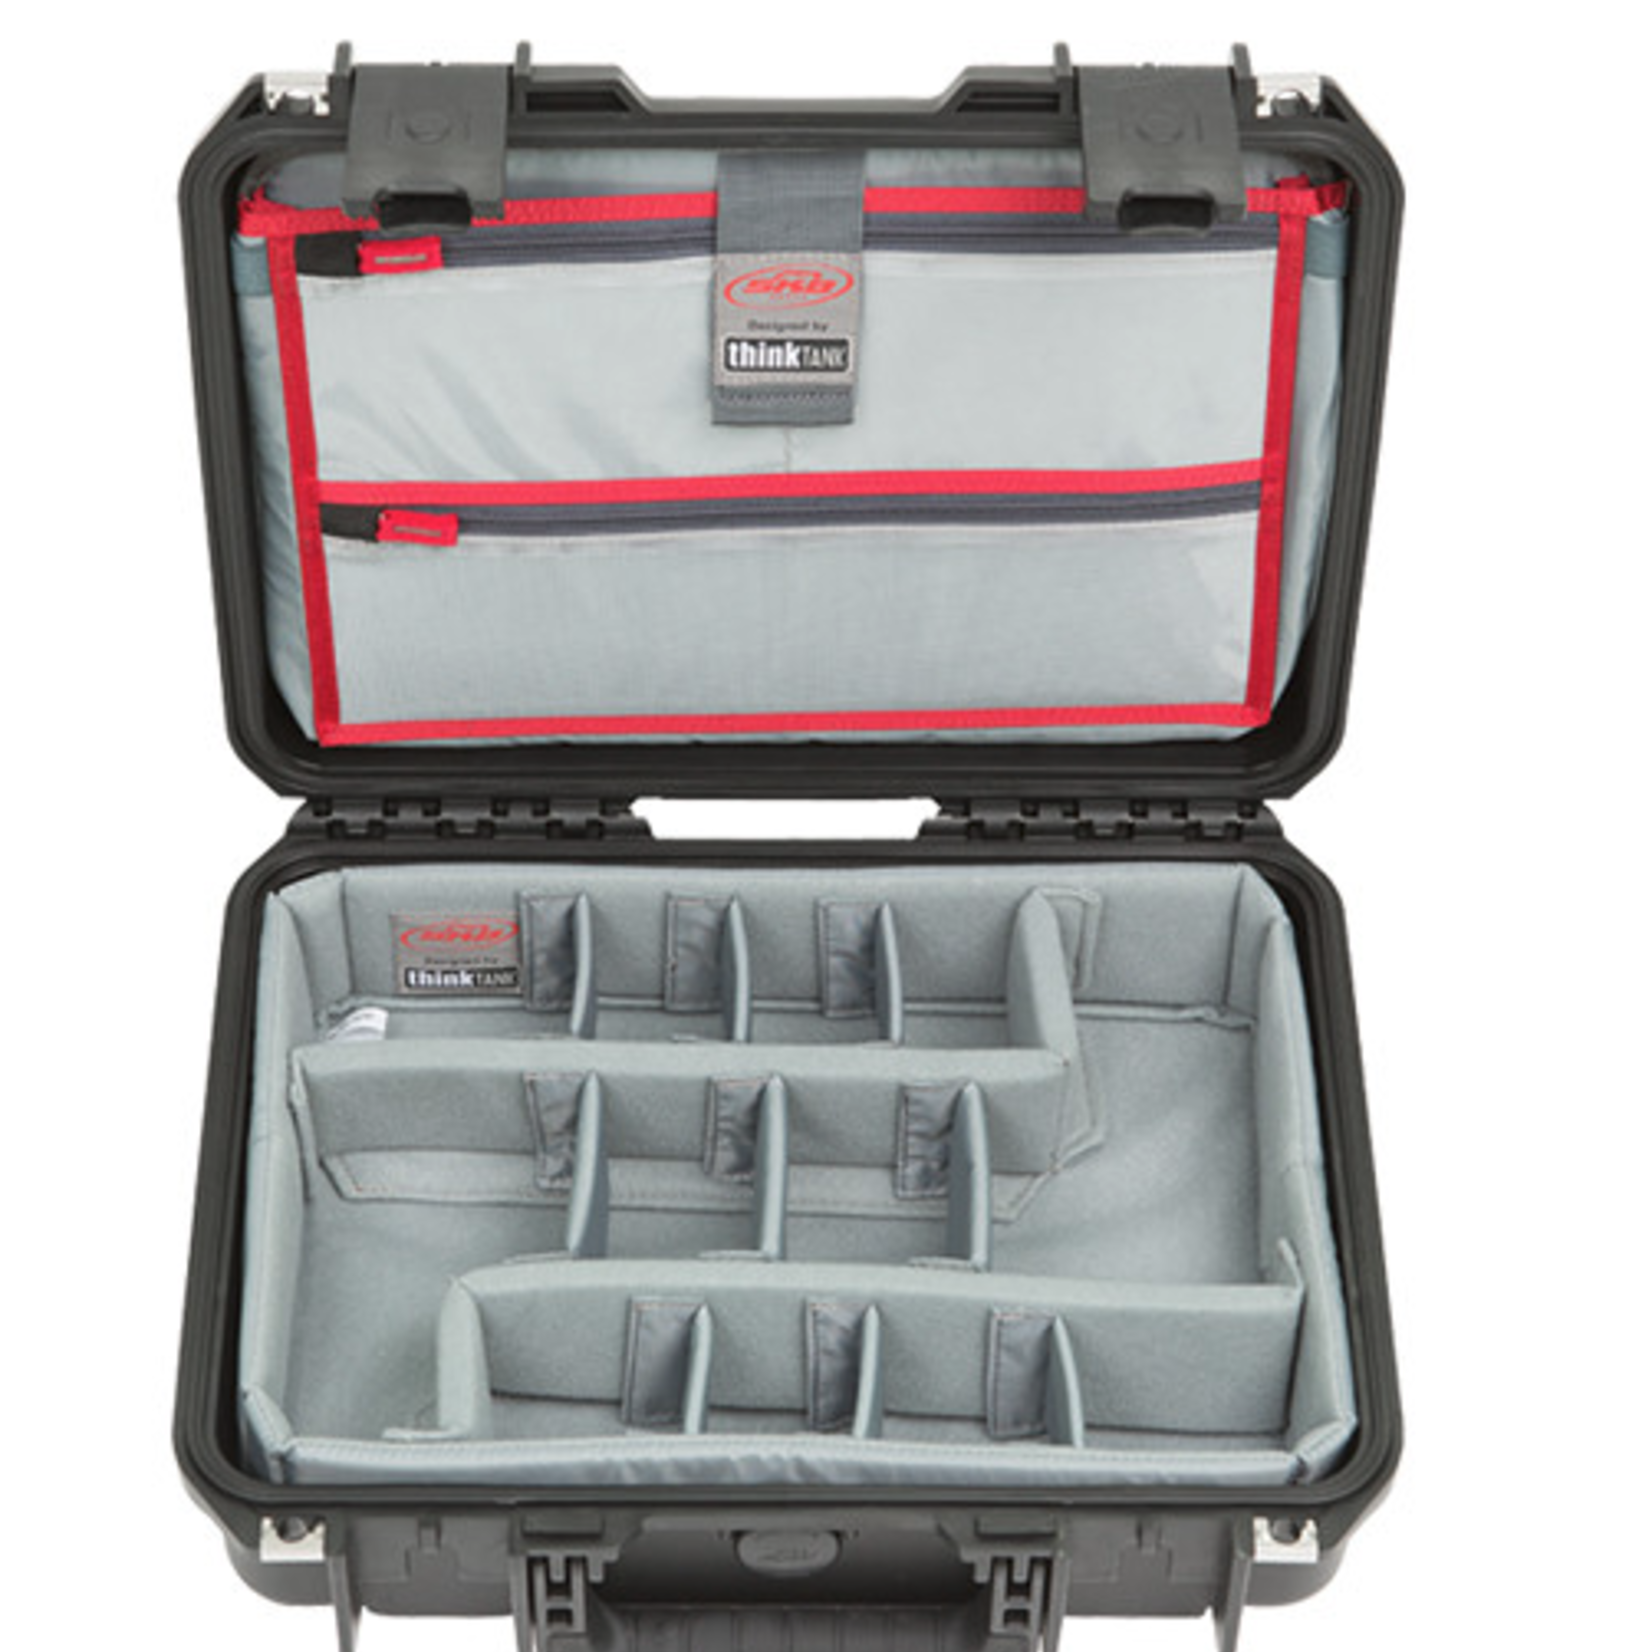 SKB Cases SKB iSeries 1510-4 Case with Think Tank Photo Dividers & Lid Organizer (Black)